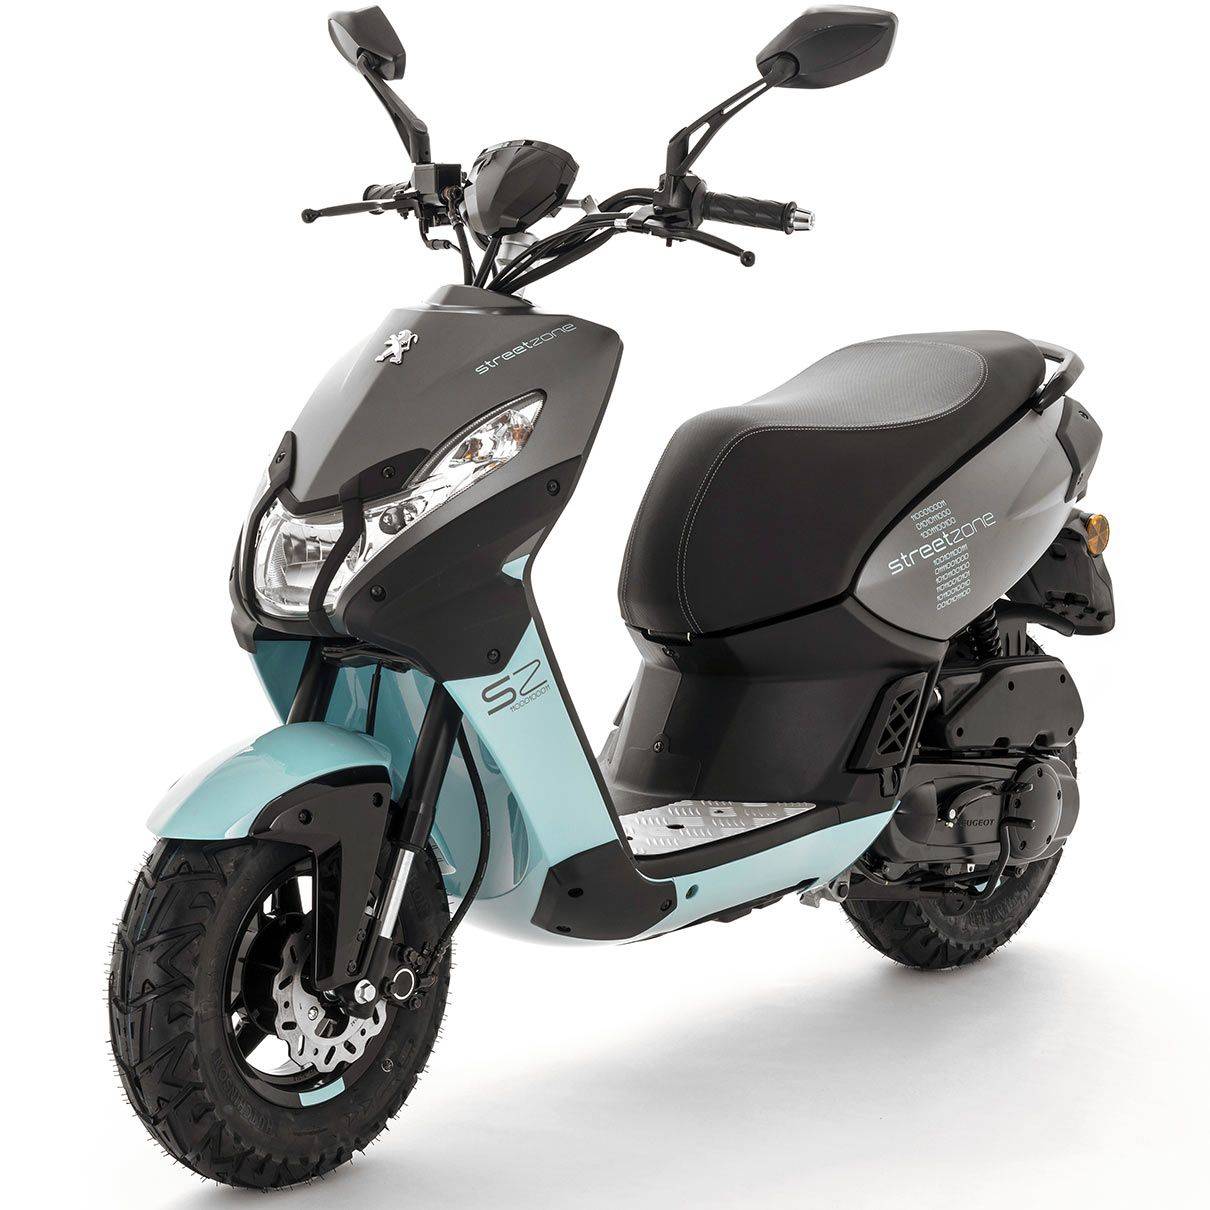 Peugeot streetzone 50 - guide d'achat scooter 50